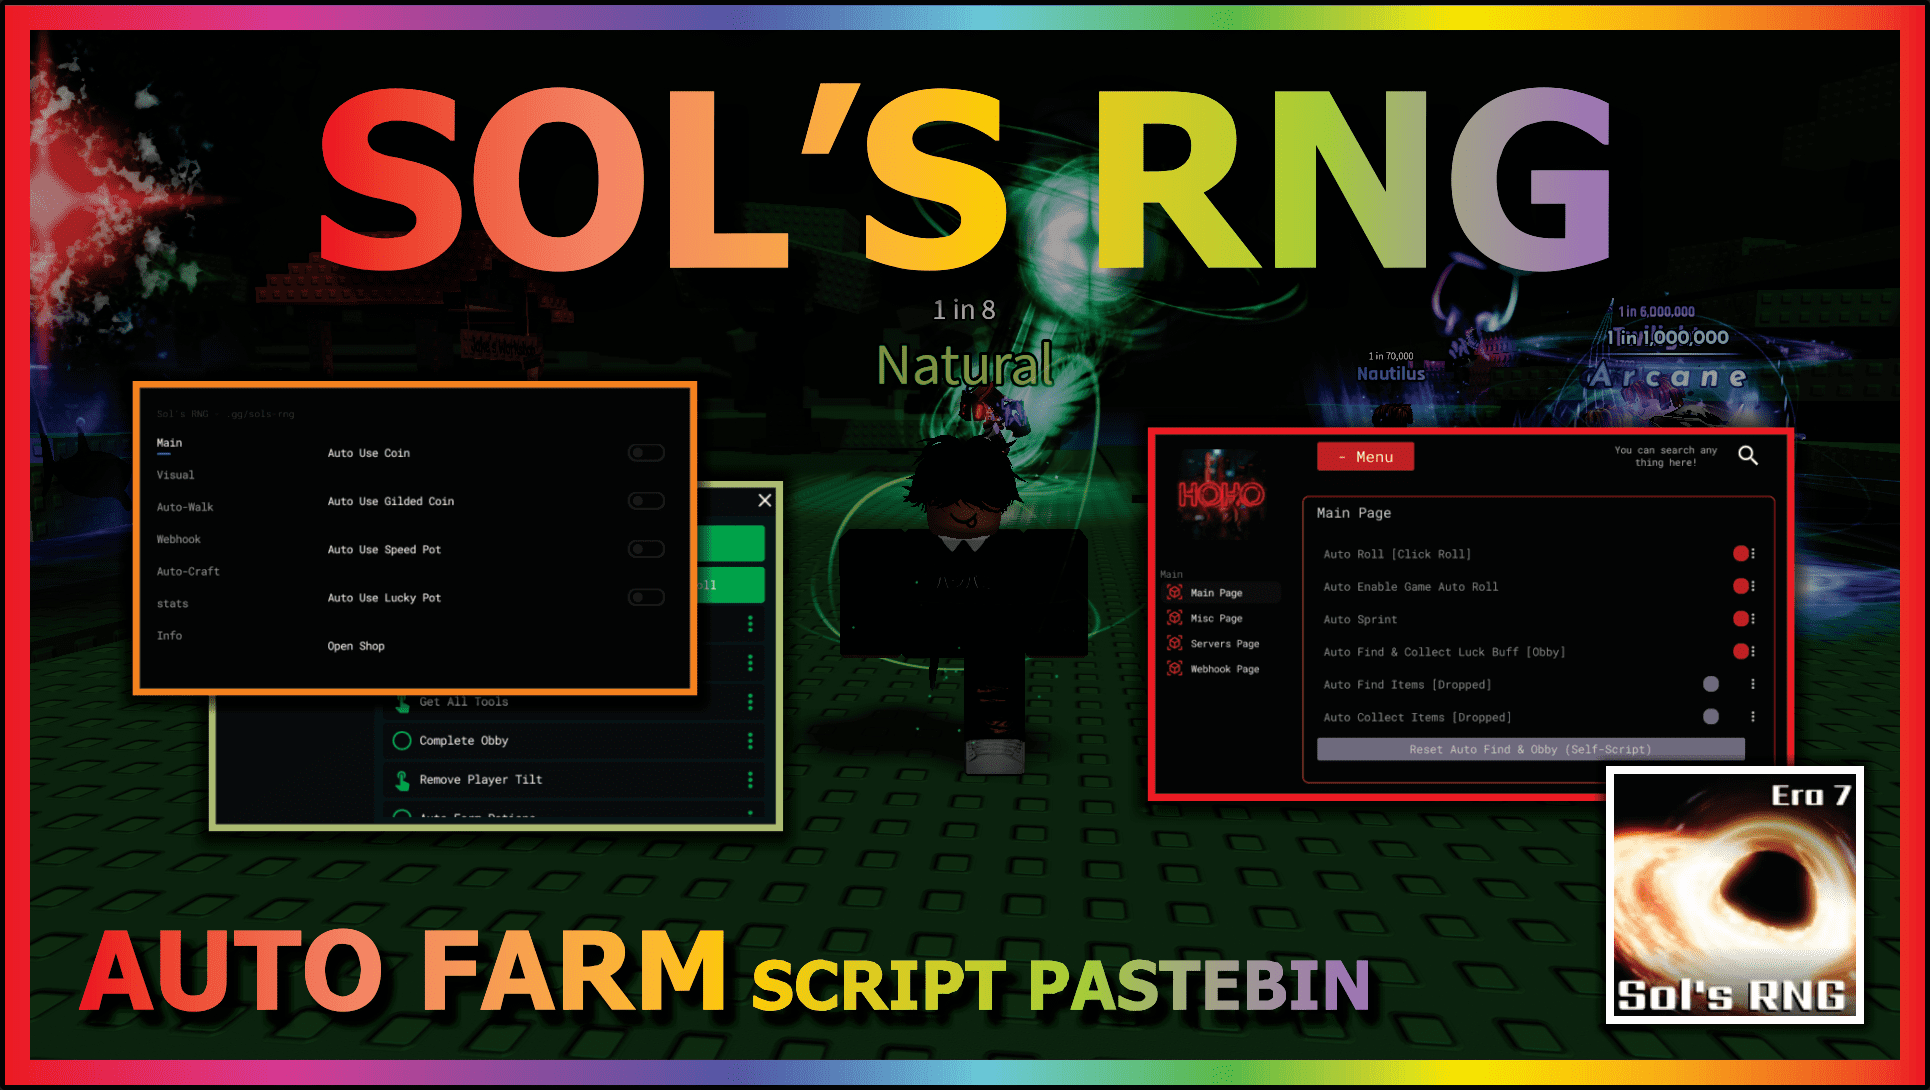 You are currently viewing SOLS RNG (LH)